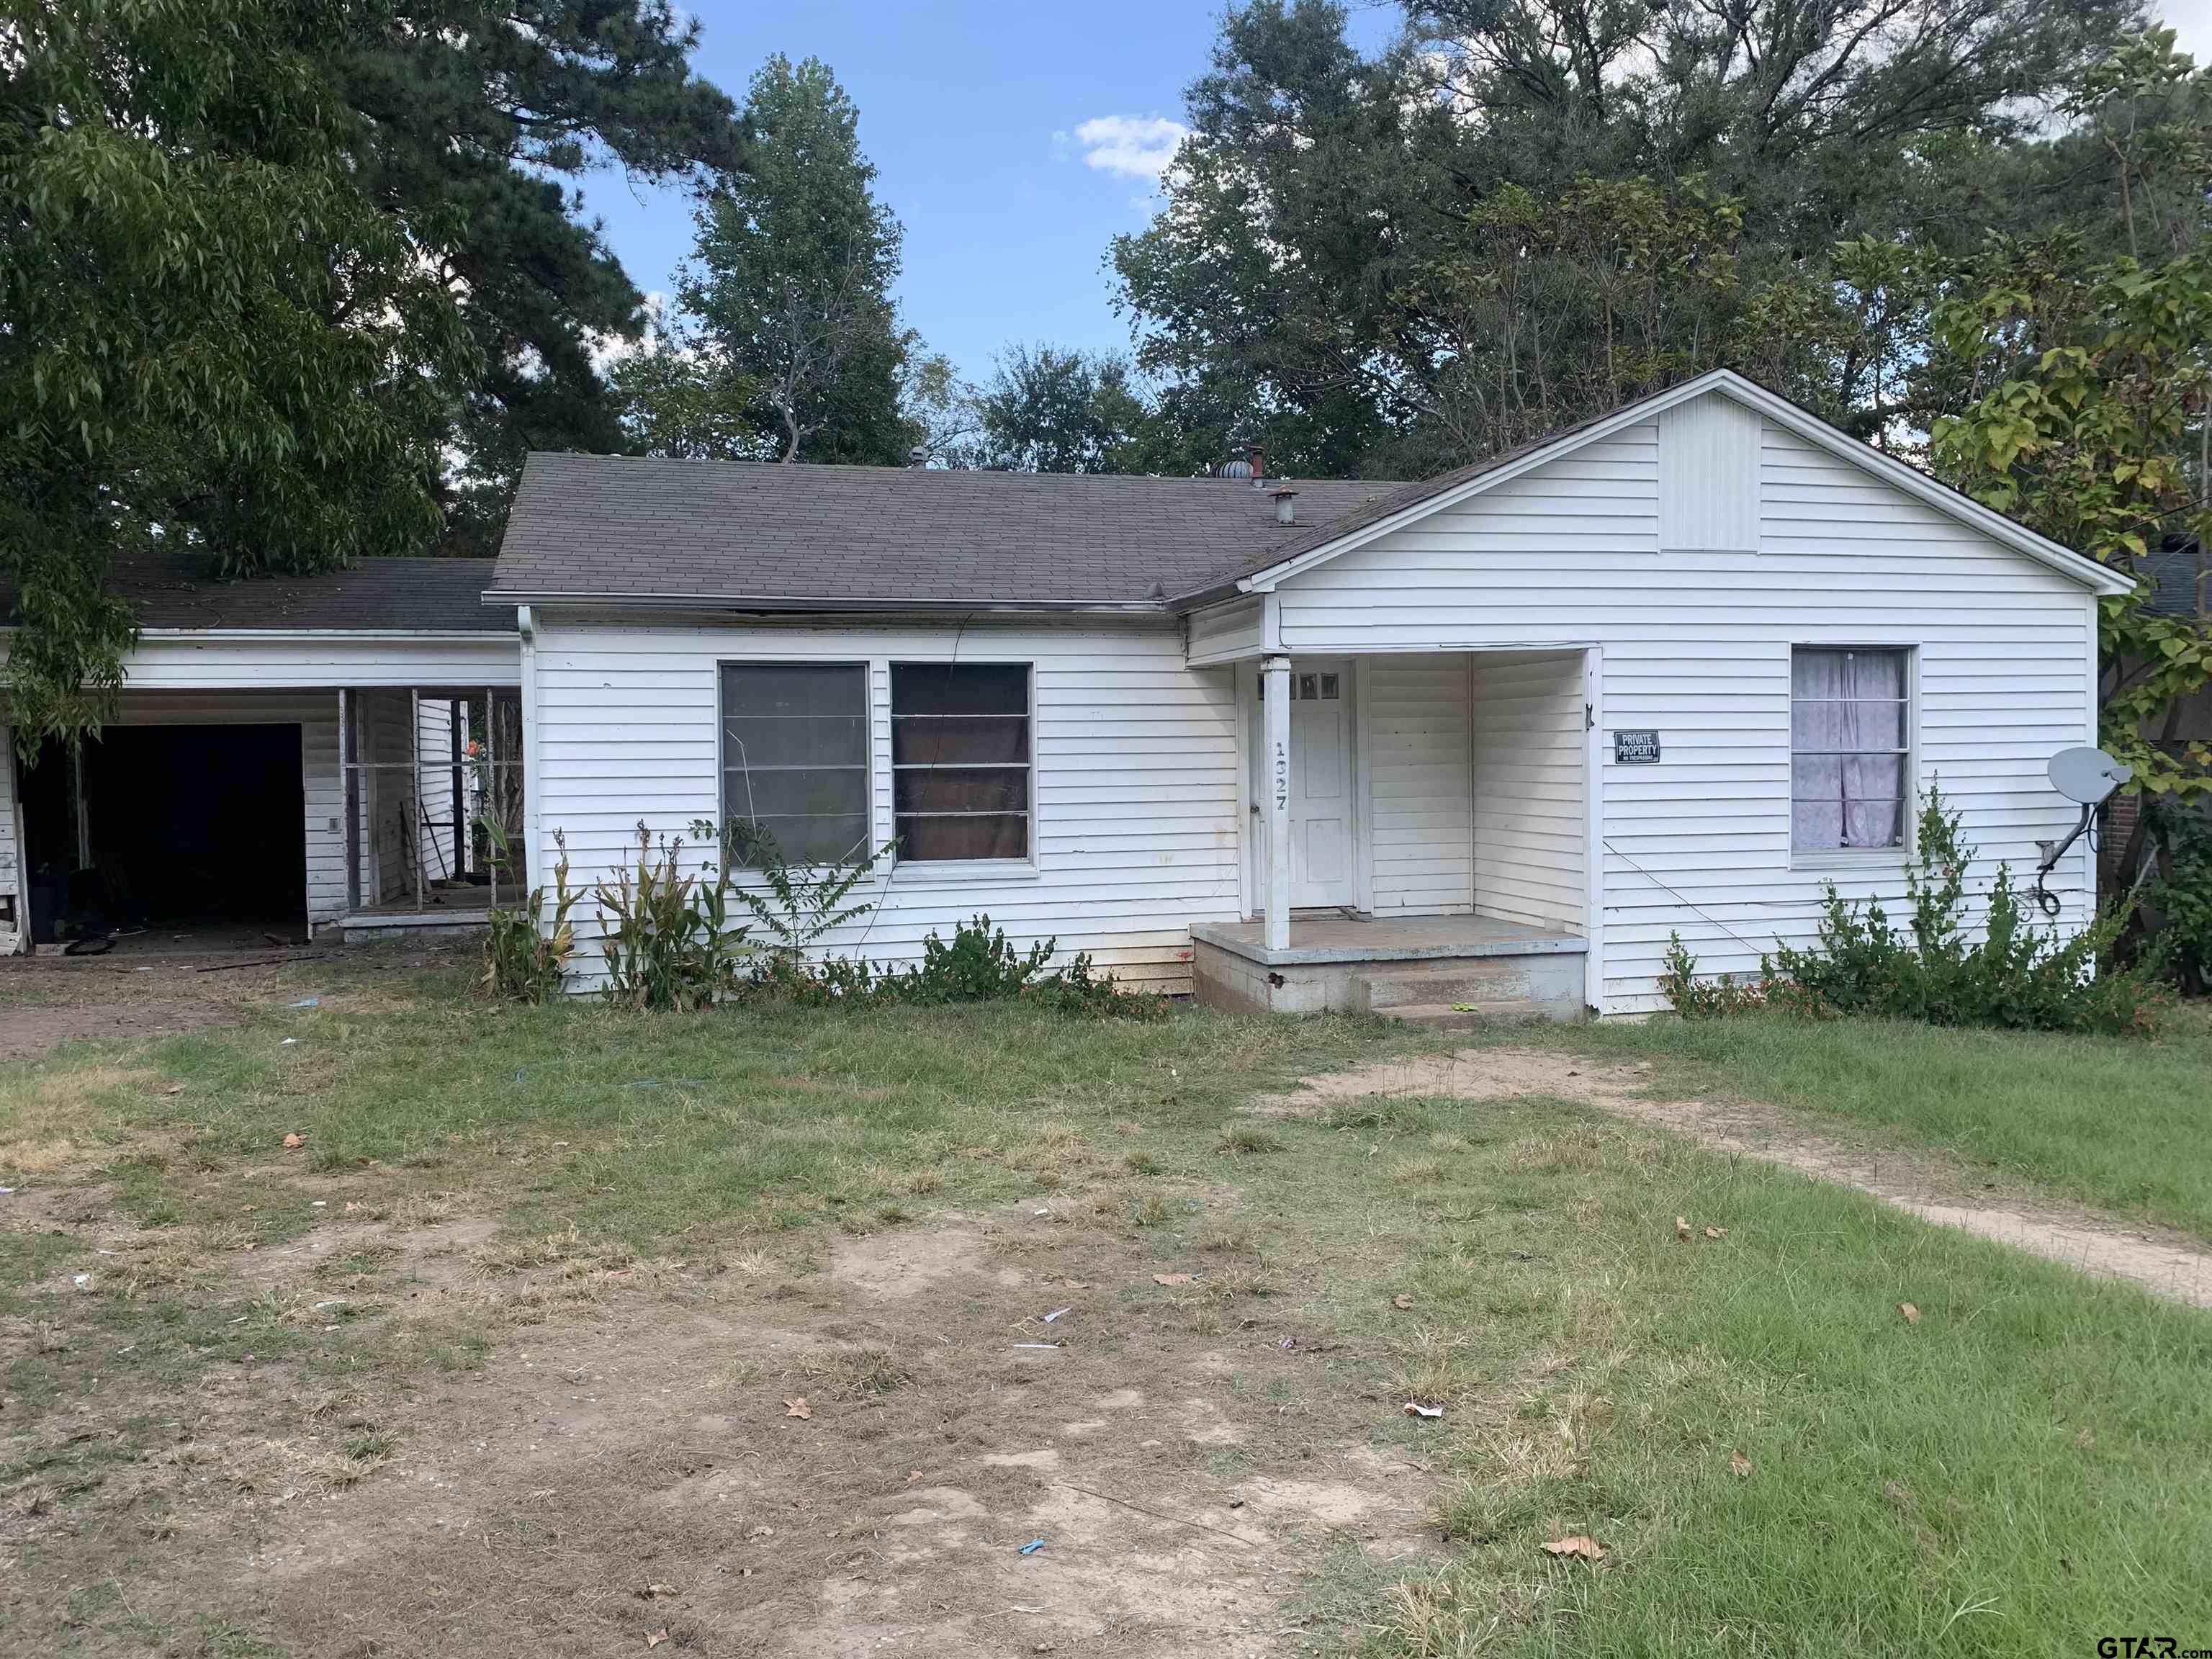 Looking for a rental investment or great starter home? With a little TLC, this property can be made into a place to call home! Sitting within the city limits, this property is close to everything Mount Pleasant has to offer! Another benefit is that it is just a few blocks away from Annie Sims Elementary School! Call today to set up a time to take a look!